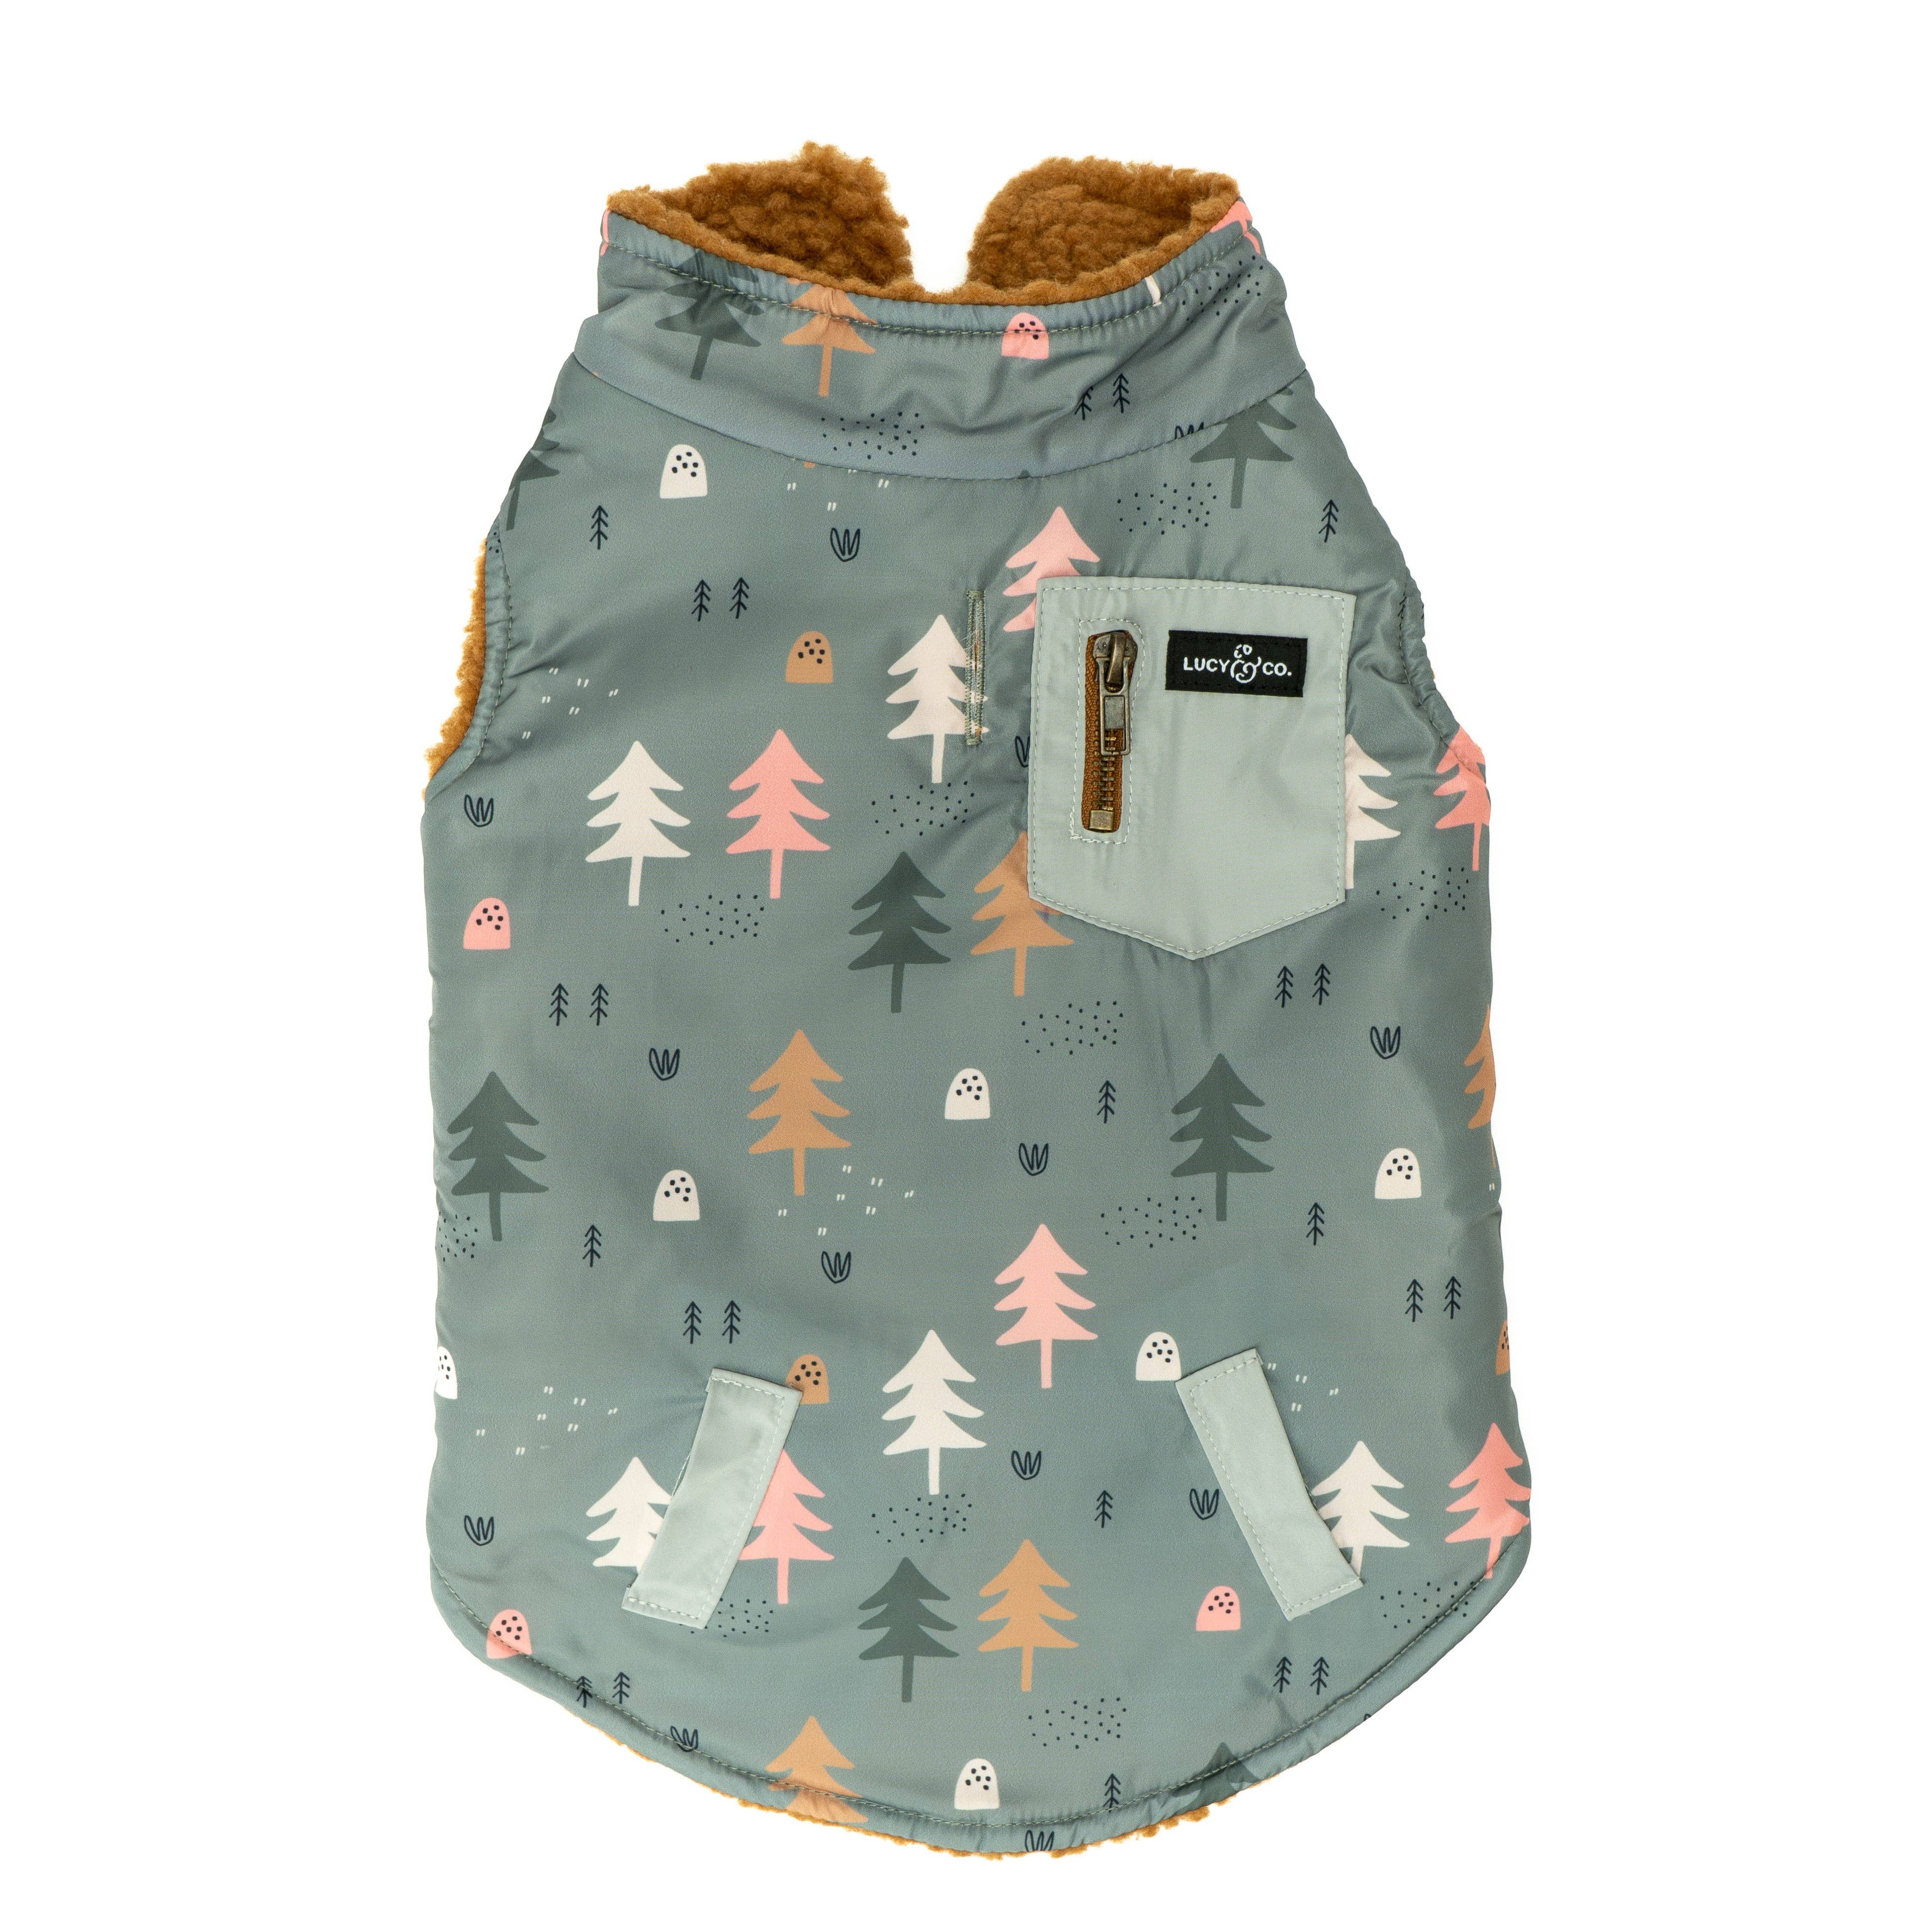 The Take a Hike Reversible Teddy Vest: X-Large